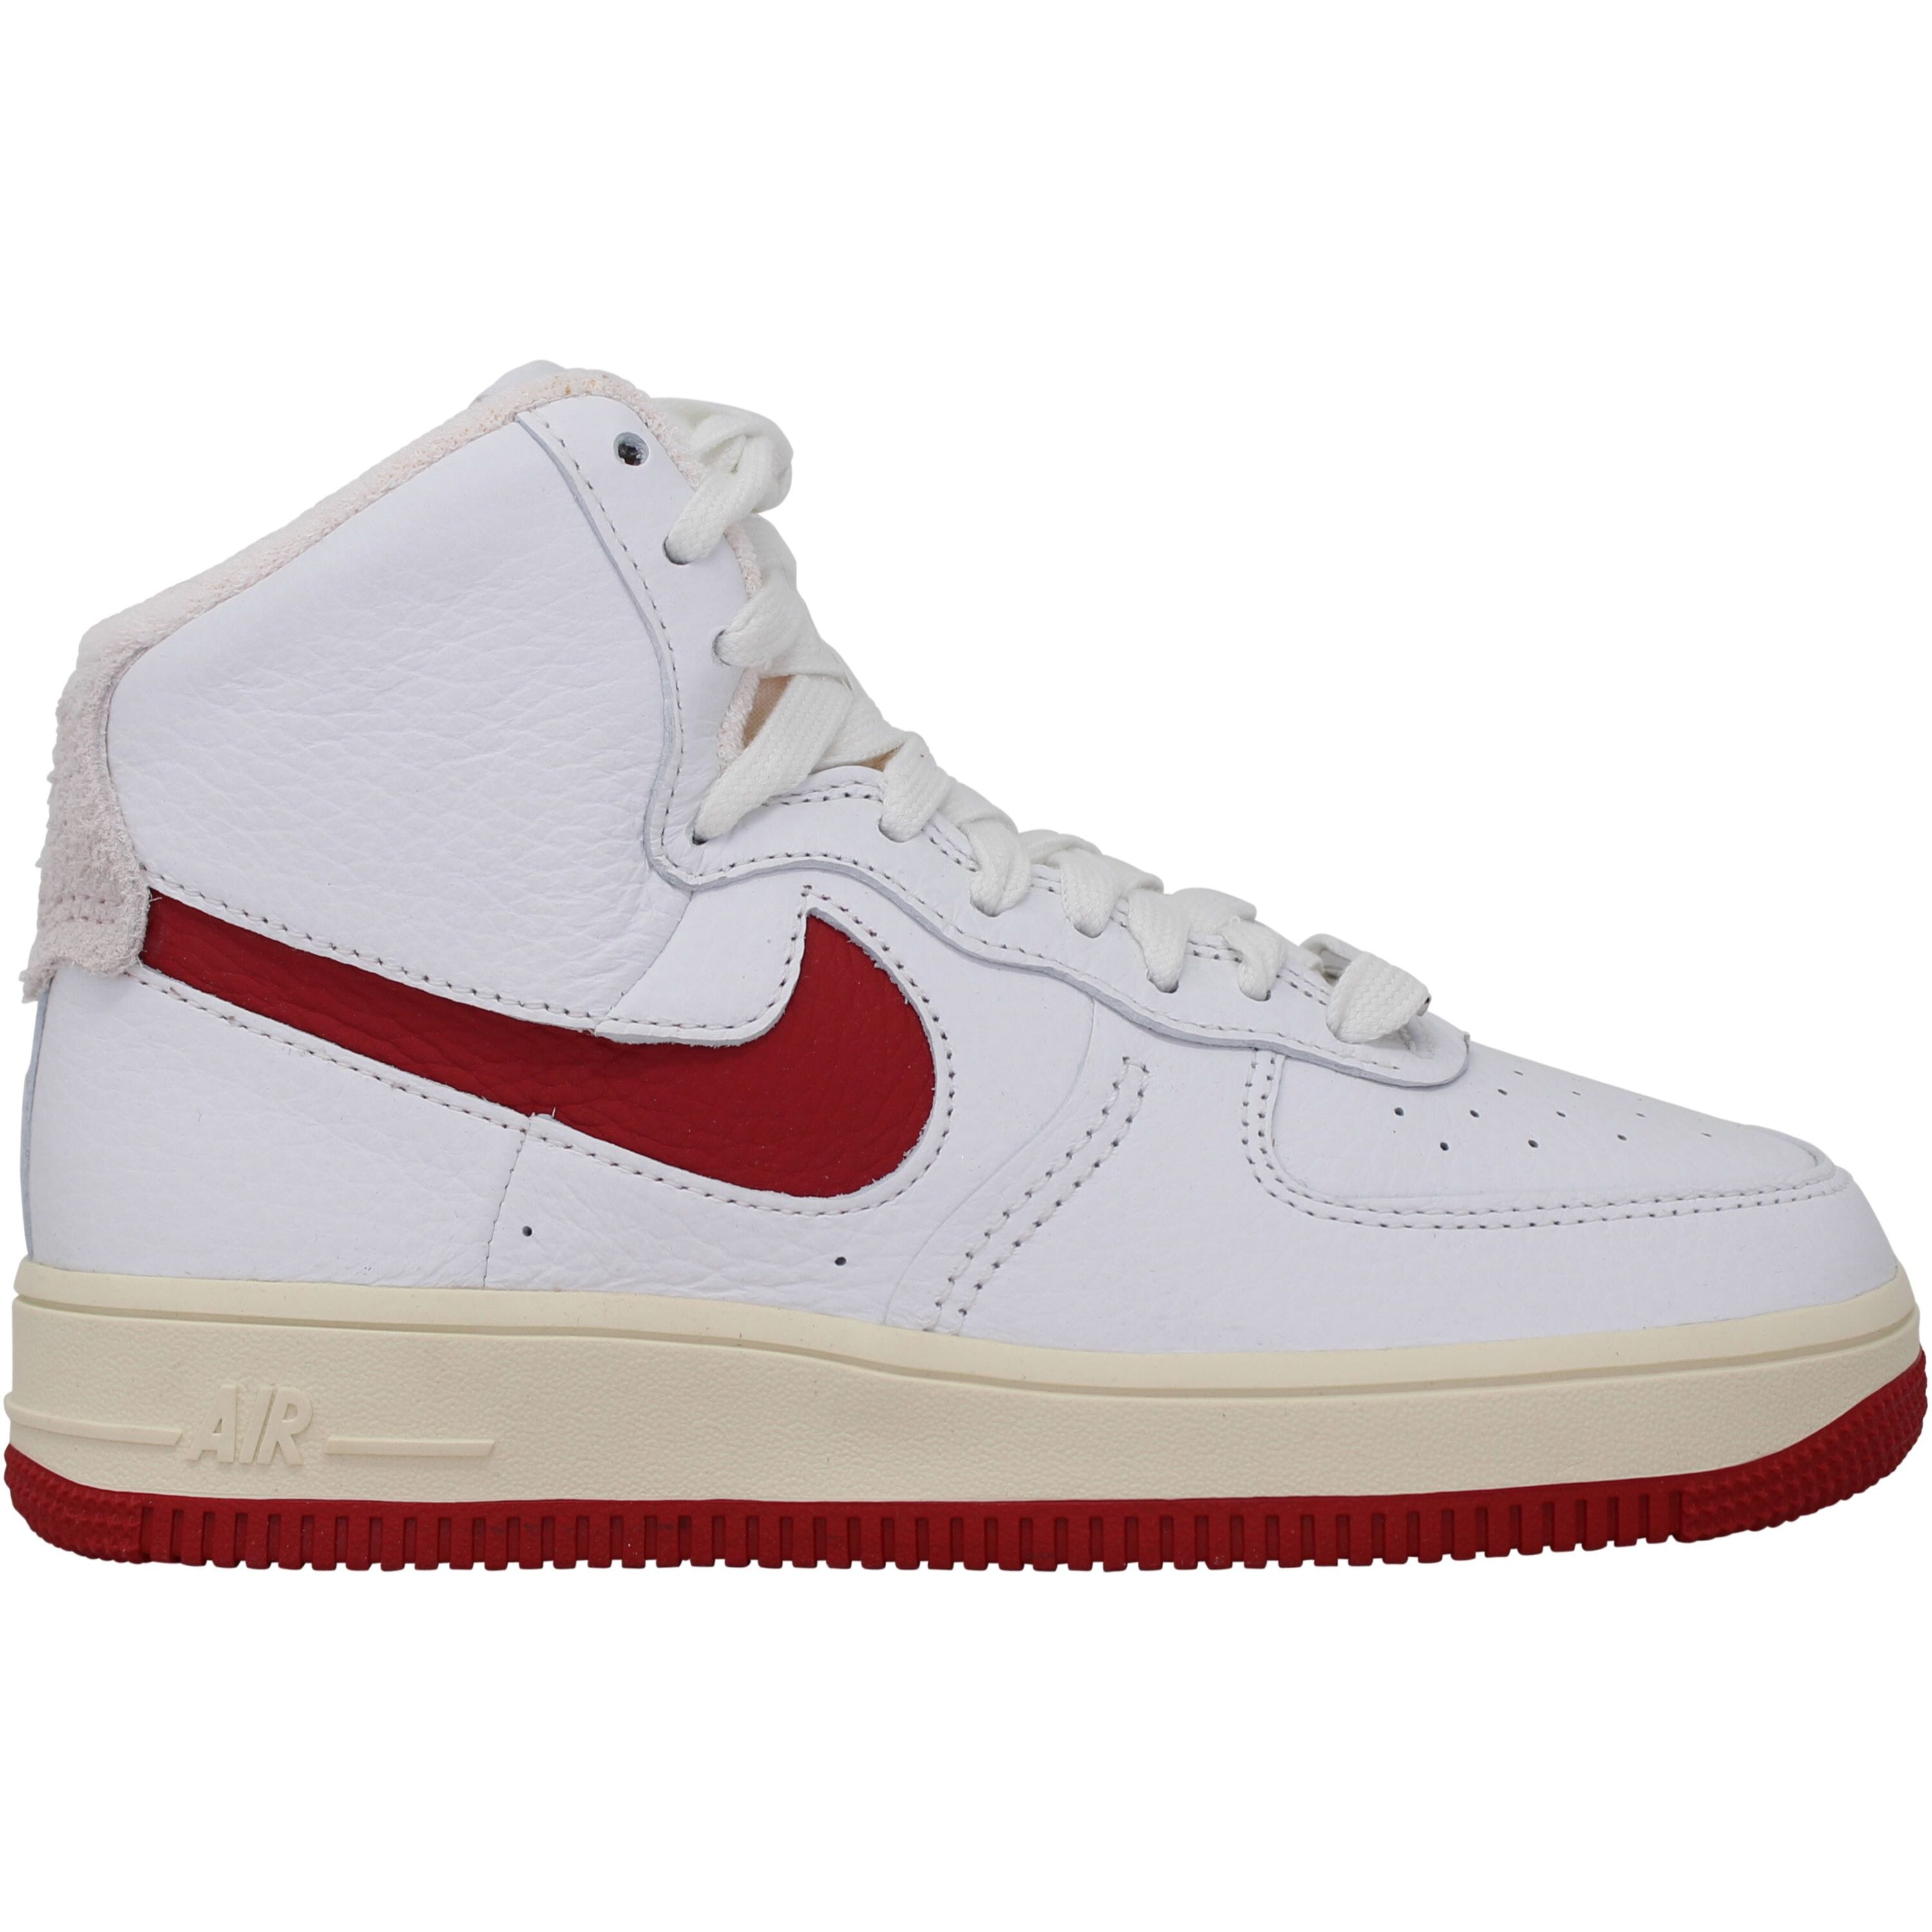 NIKE Nike AF1 Sculpt Summit White/Red  DC3590-100 Women's